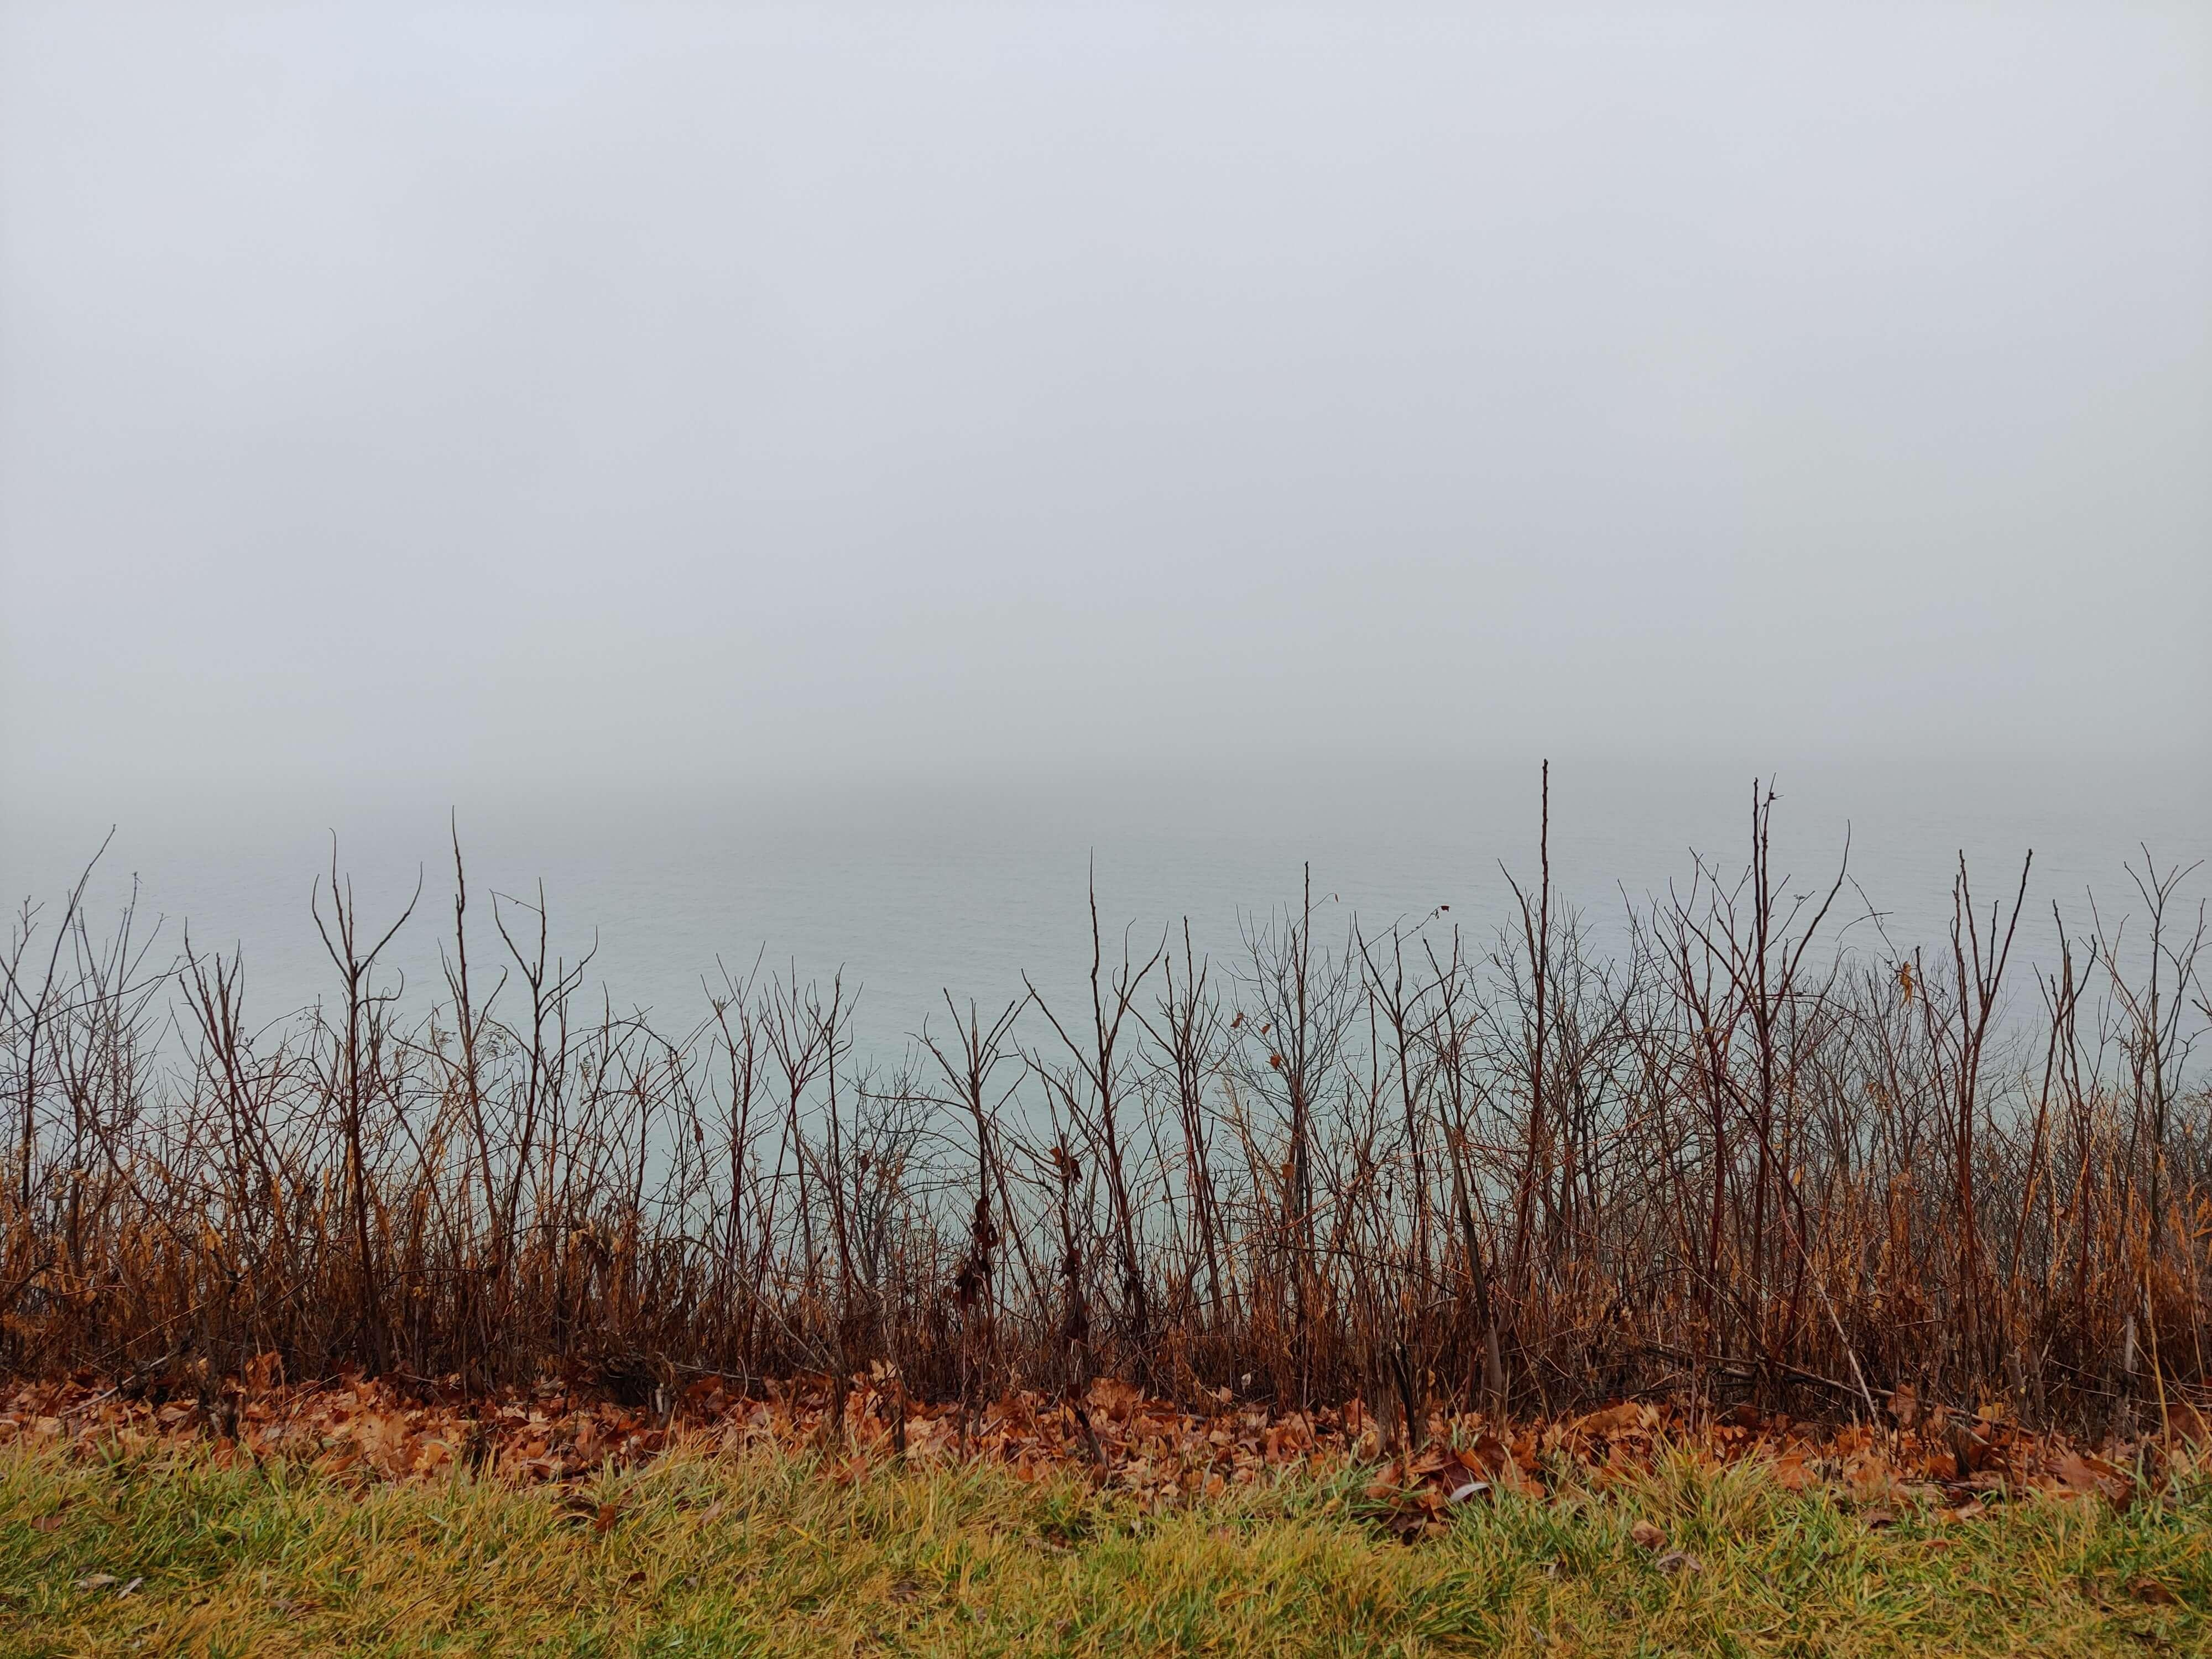 a view of Lake Michigan from a small cliff on a misty day. in the foreground are wet grass and bushes with bare branches. in the background, the lake blurs into the foggy sky